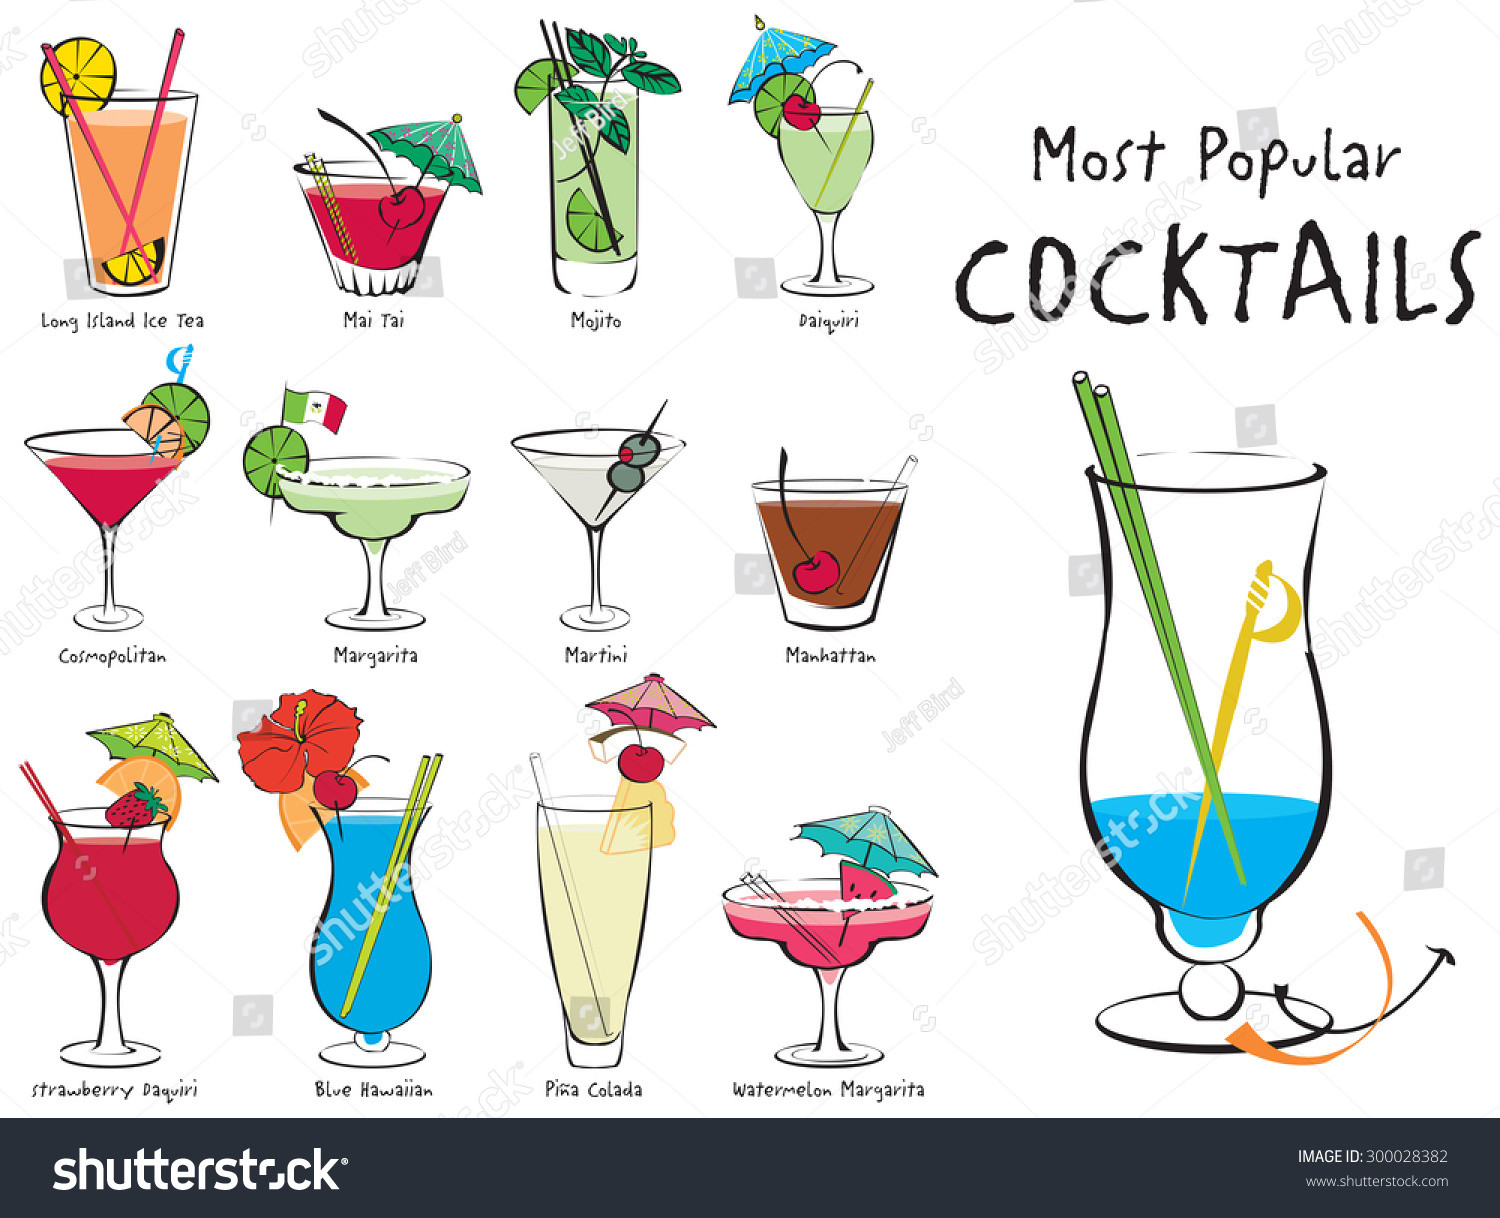 Most Popular Cocktails
 Colorful Vector Illustration The Most Popular Cocktails